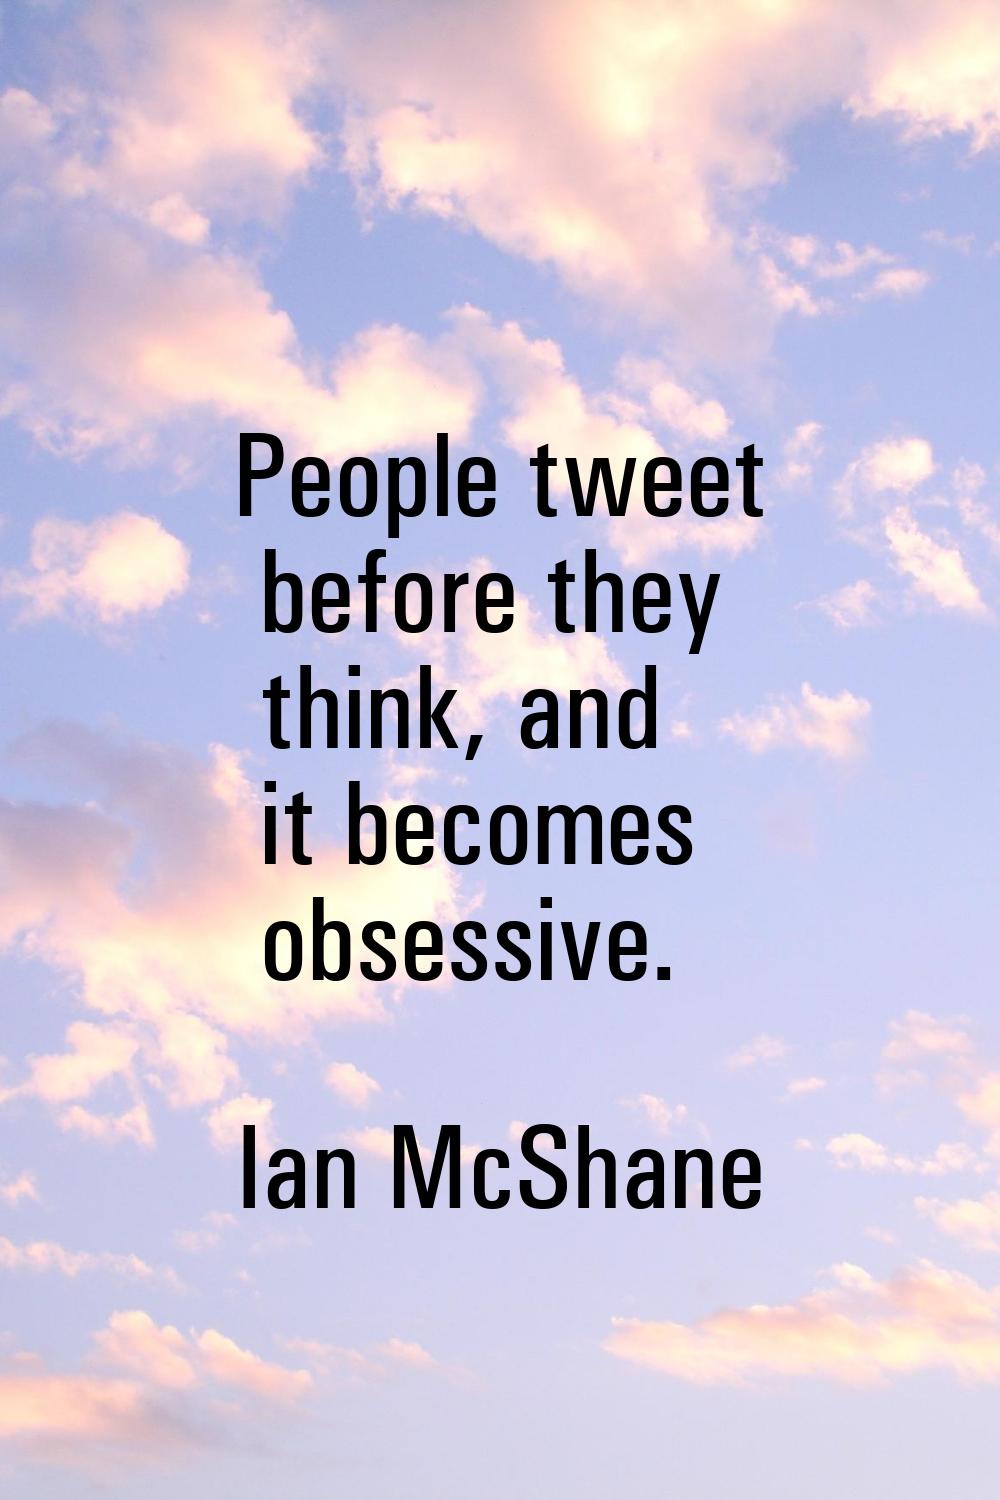 People tweet before they think, and it becomes obsessive.